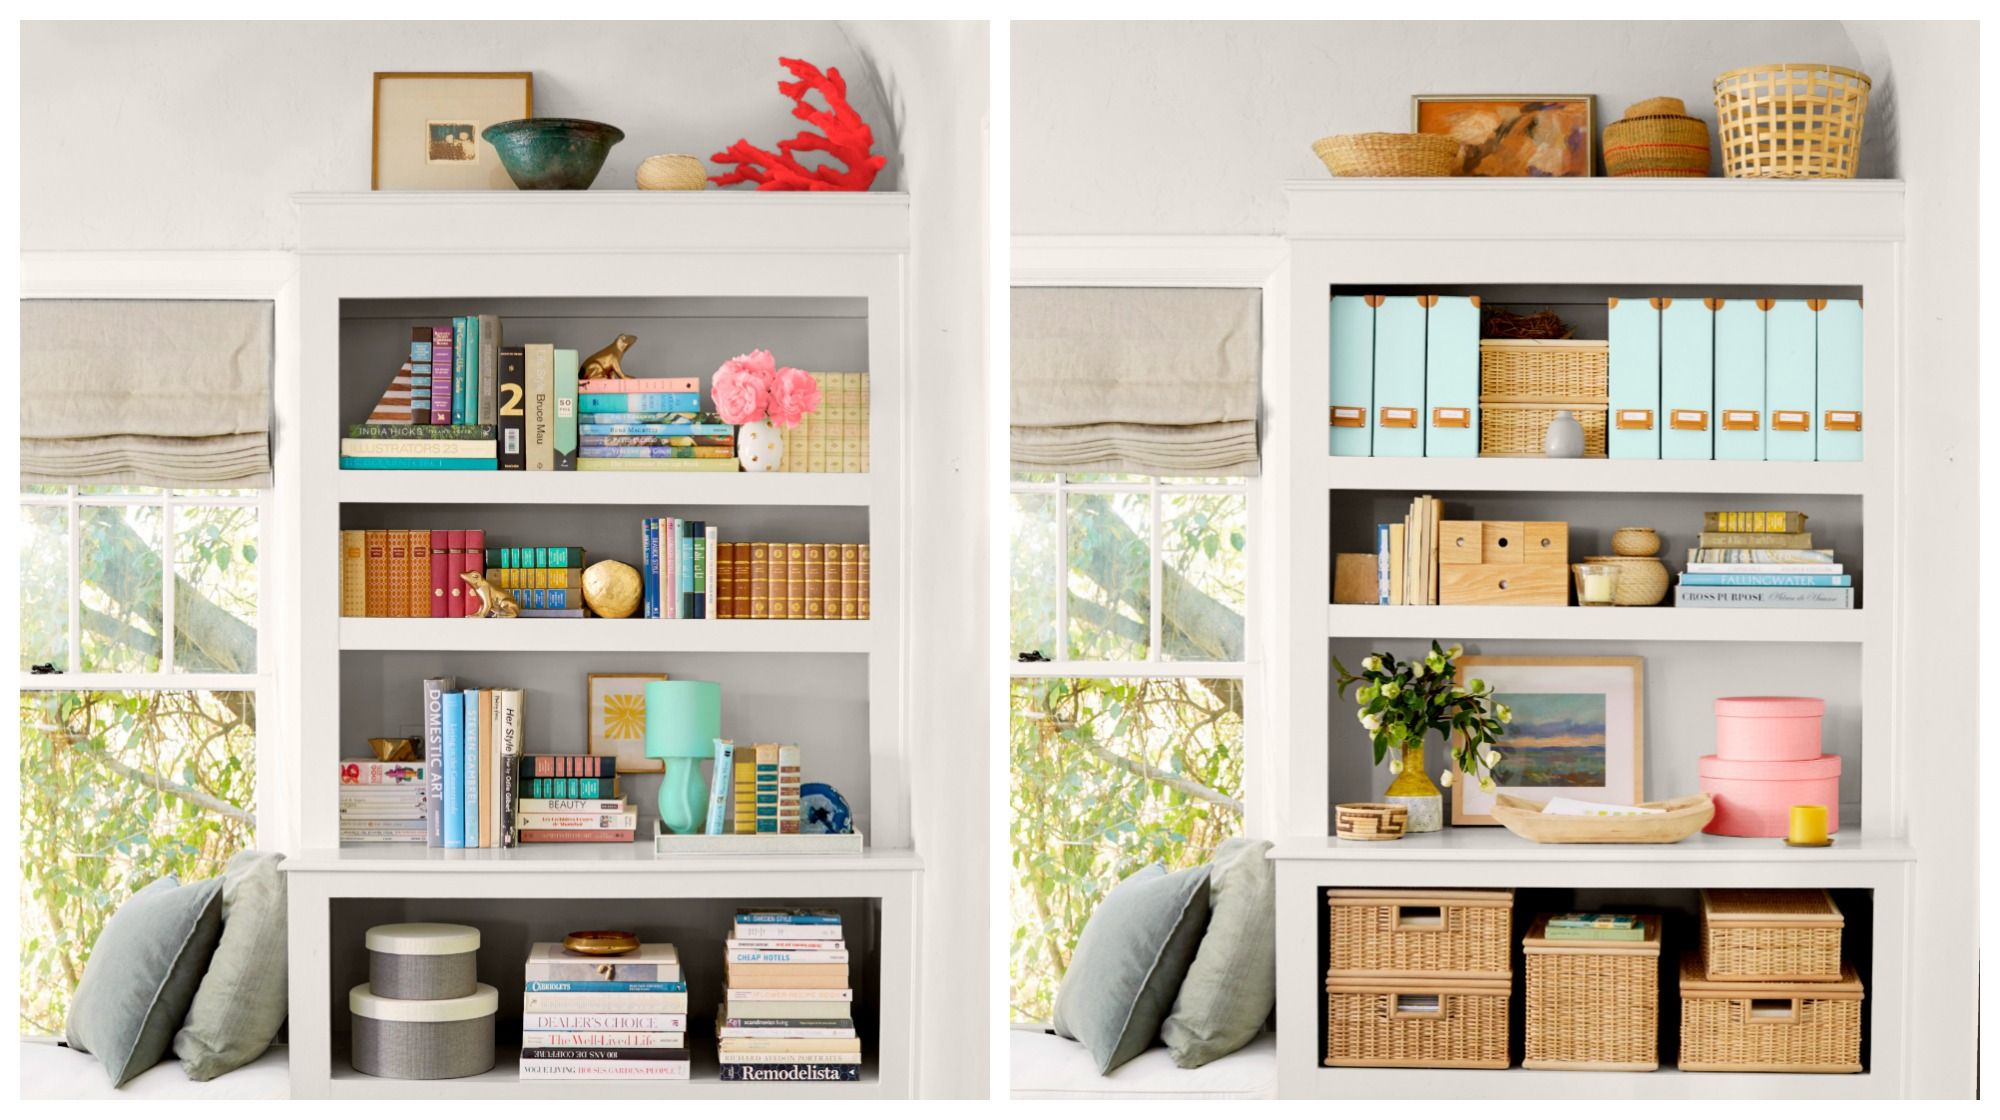 6 Organization Ideas For Your, Real Organized Shelving